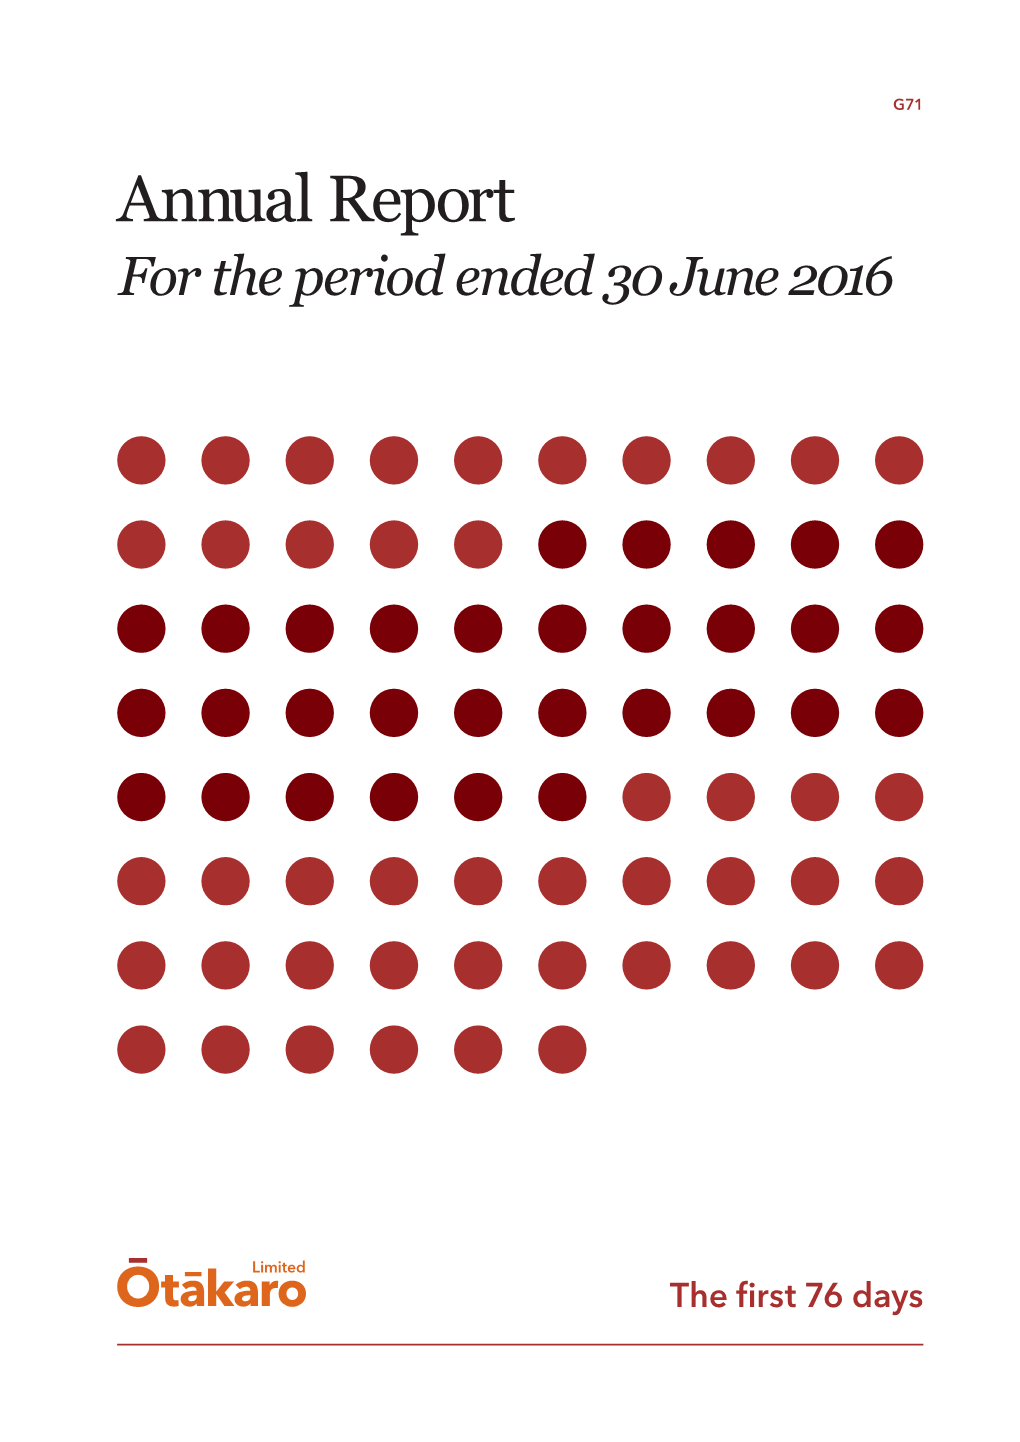 Annual Report for the Period Ended 30 June 2016